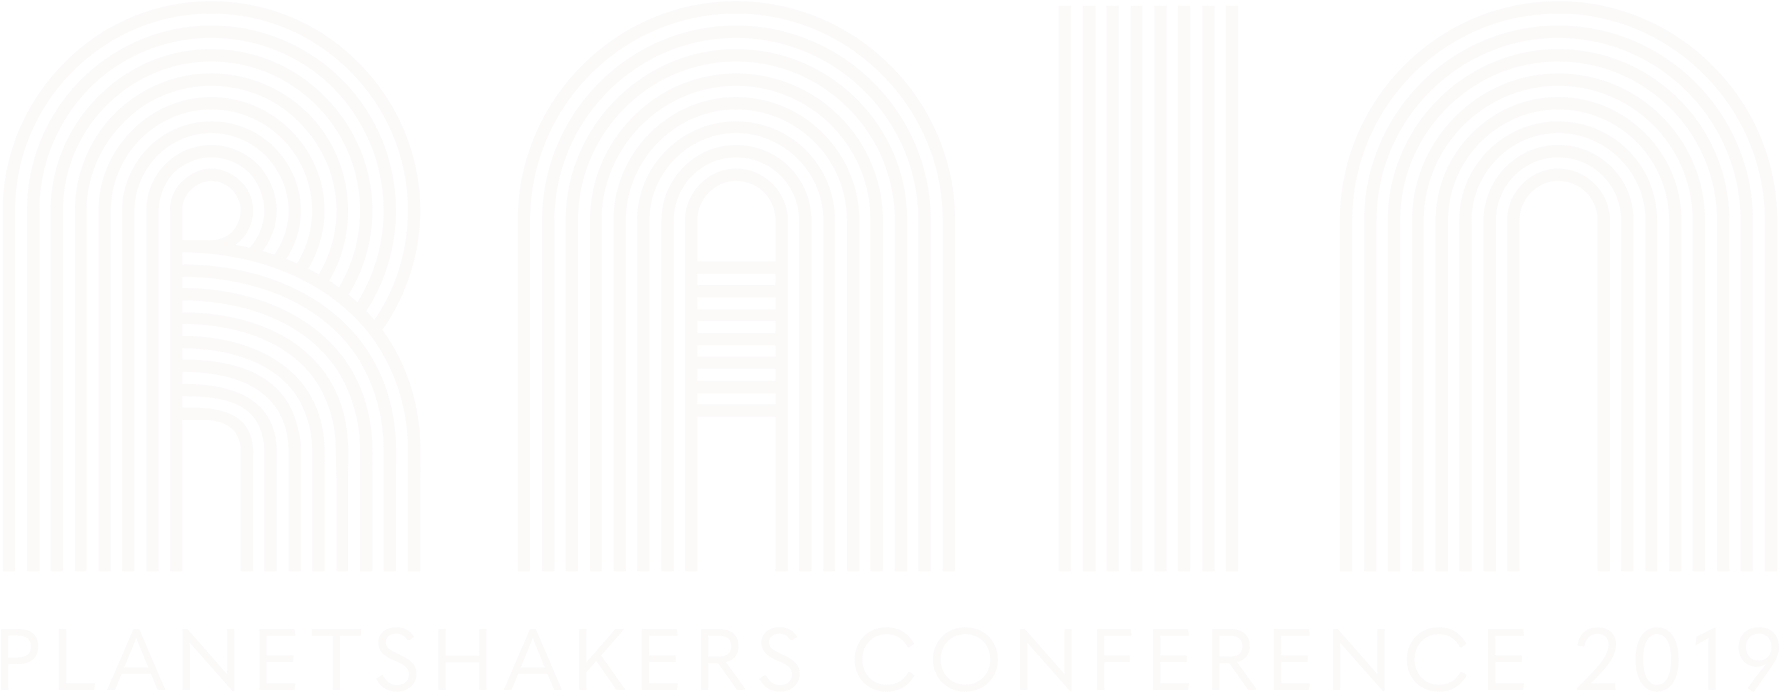 Planetshakers Conference - Planetshaker Ticket 2019 (1920x1080), Png Download